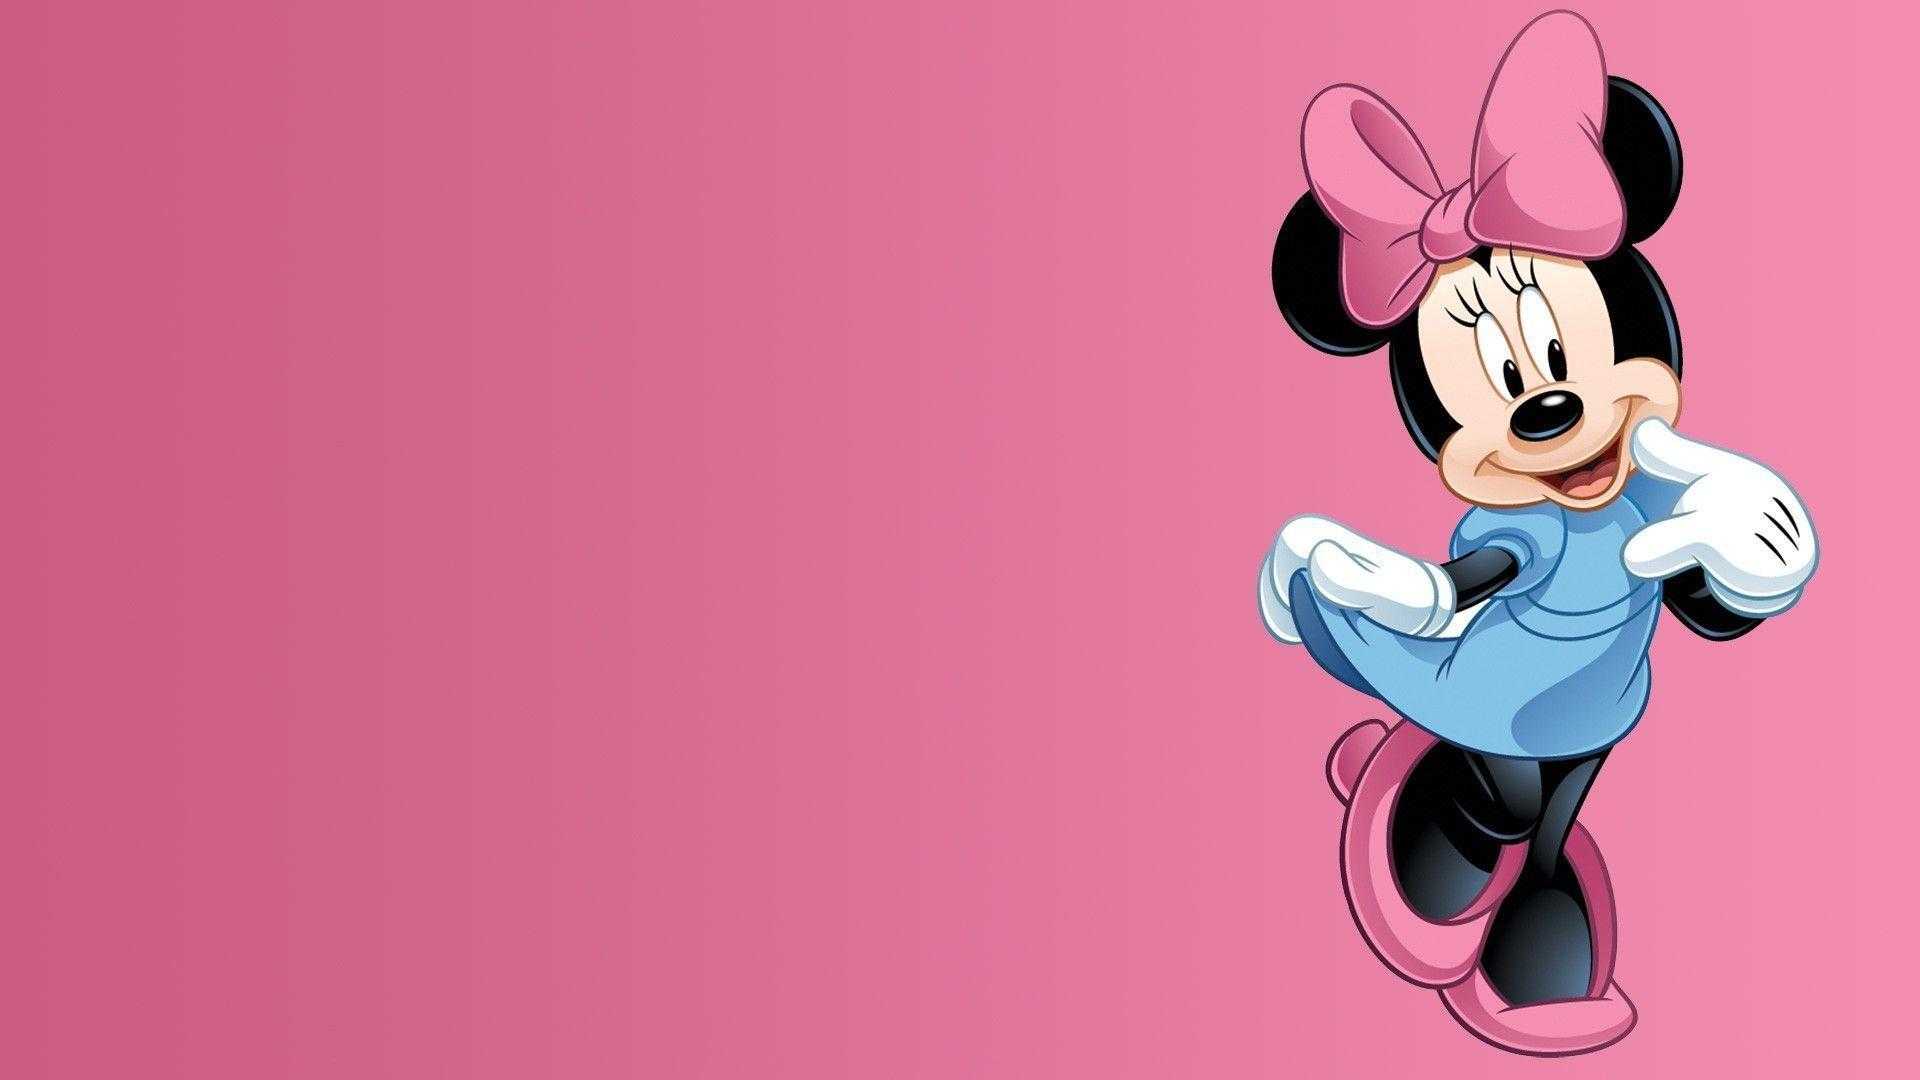 Minnie Mouse Wallpaper - NawPic